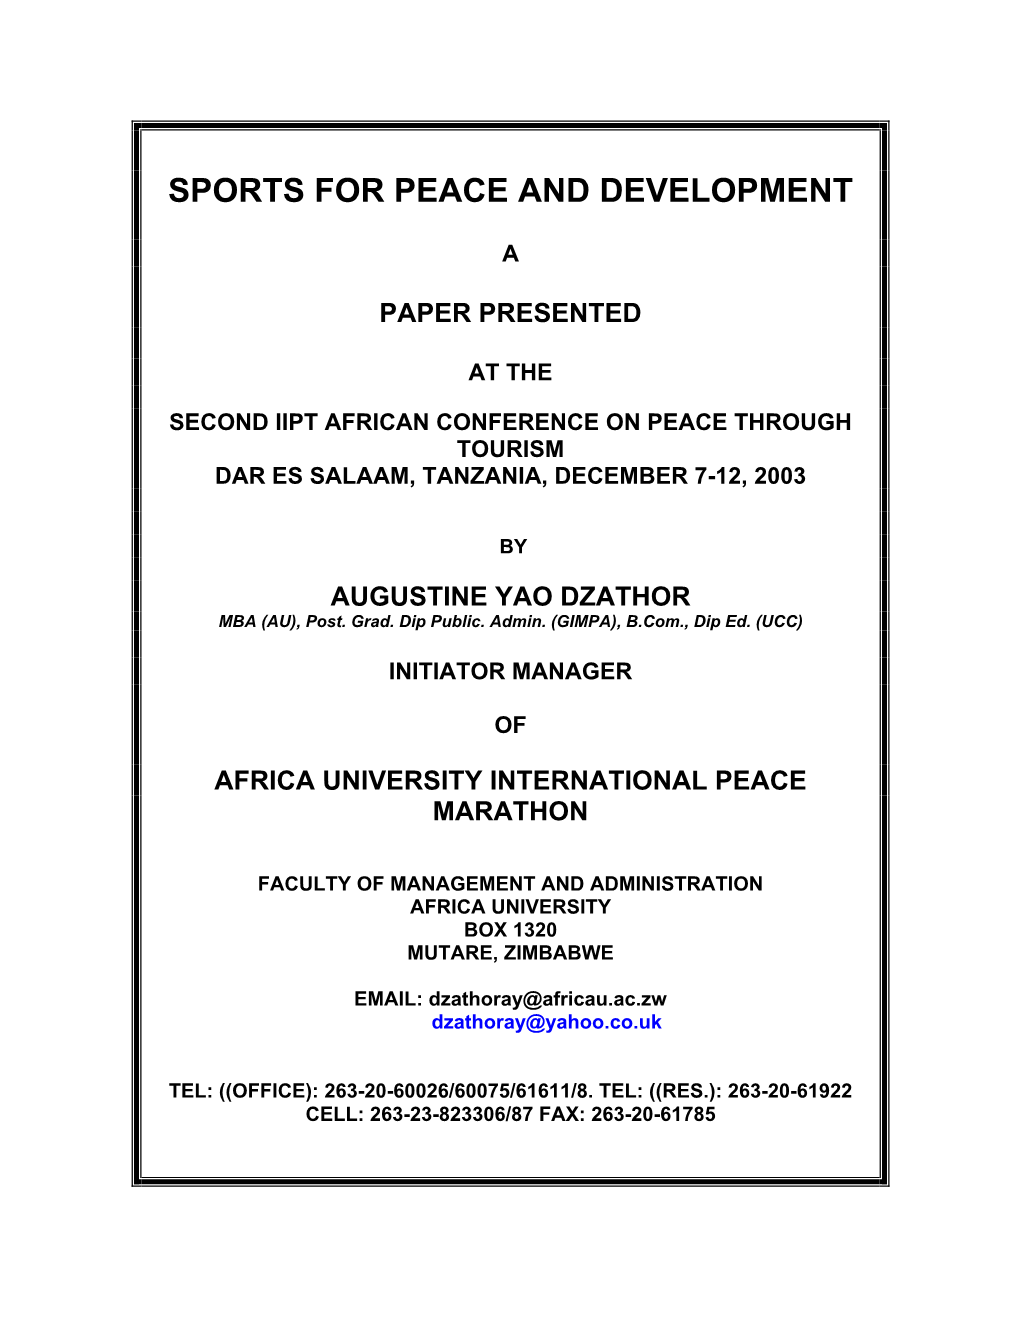 Sports for Peace and Development